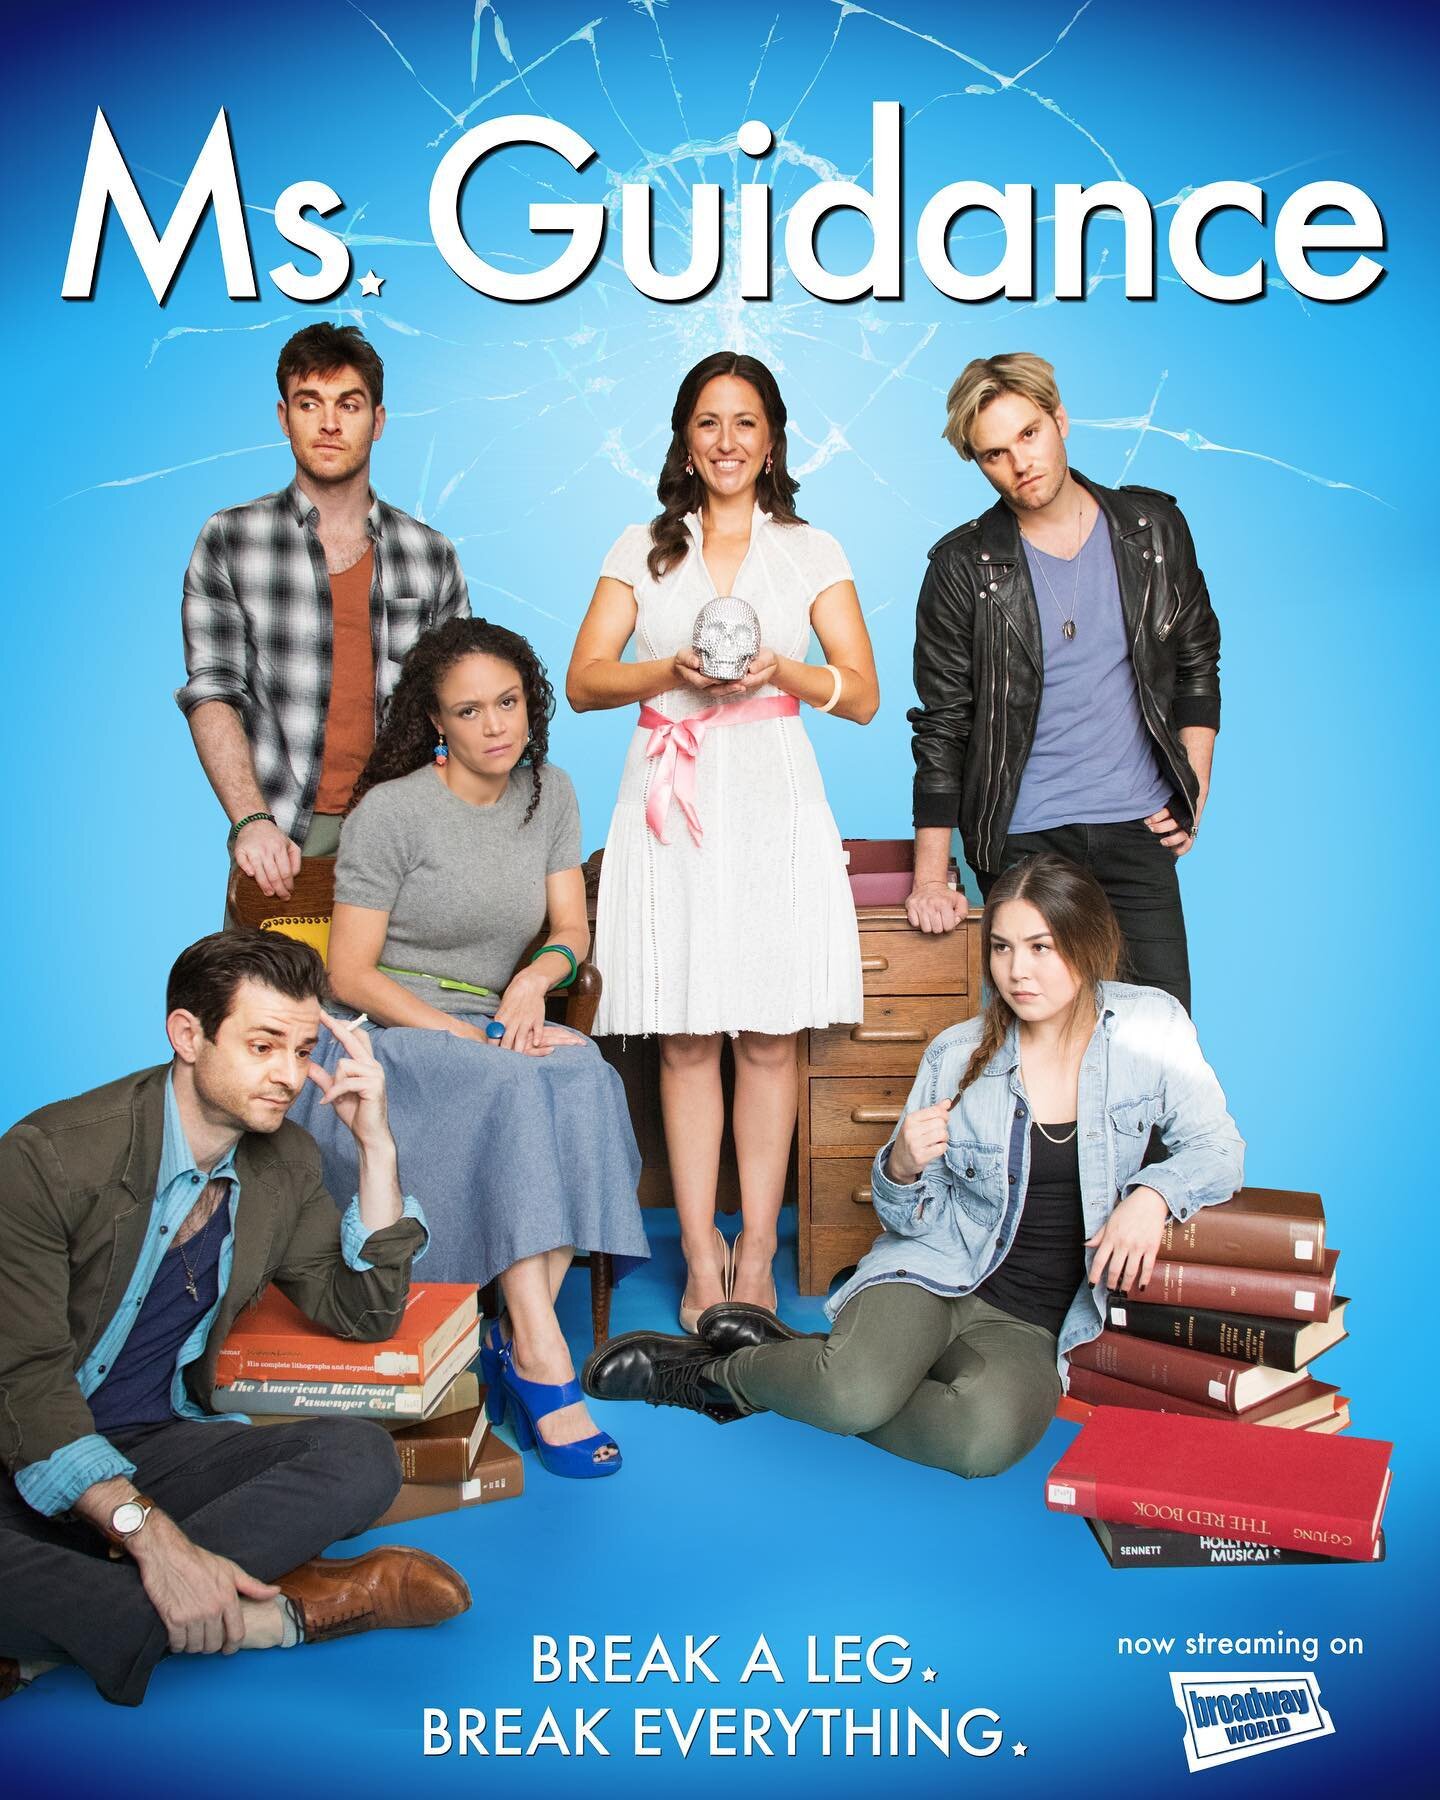 A show @van.hansis, @jrcjrcjrcjrcjrcjrcjrc, @melodiesbliss and I produced, Ms. Guidance, has launched exclusively on BroadwayWorld!

This show has been many years in the making and now we are thrilled to share it with all of you!

The first 2 episode